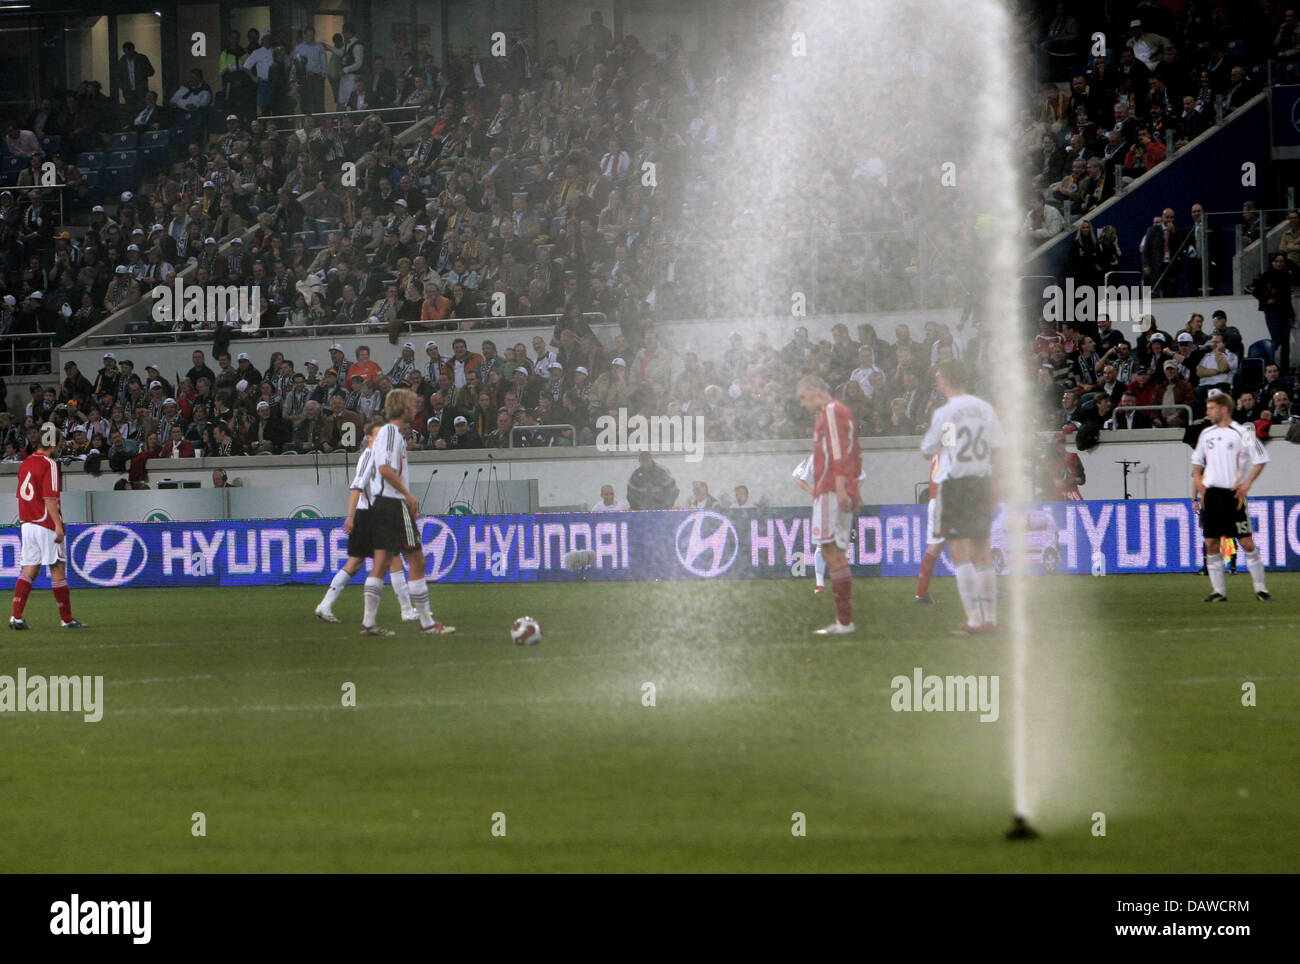 The lawn irrigation goes on during the test cap Germany v Denmark at the MSV Arena stadium of Duisburg, Germany, Wednesday 28 March 2007. Photo: Achim Scheidemann Stock Photo